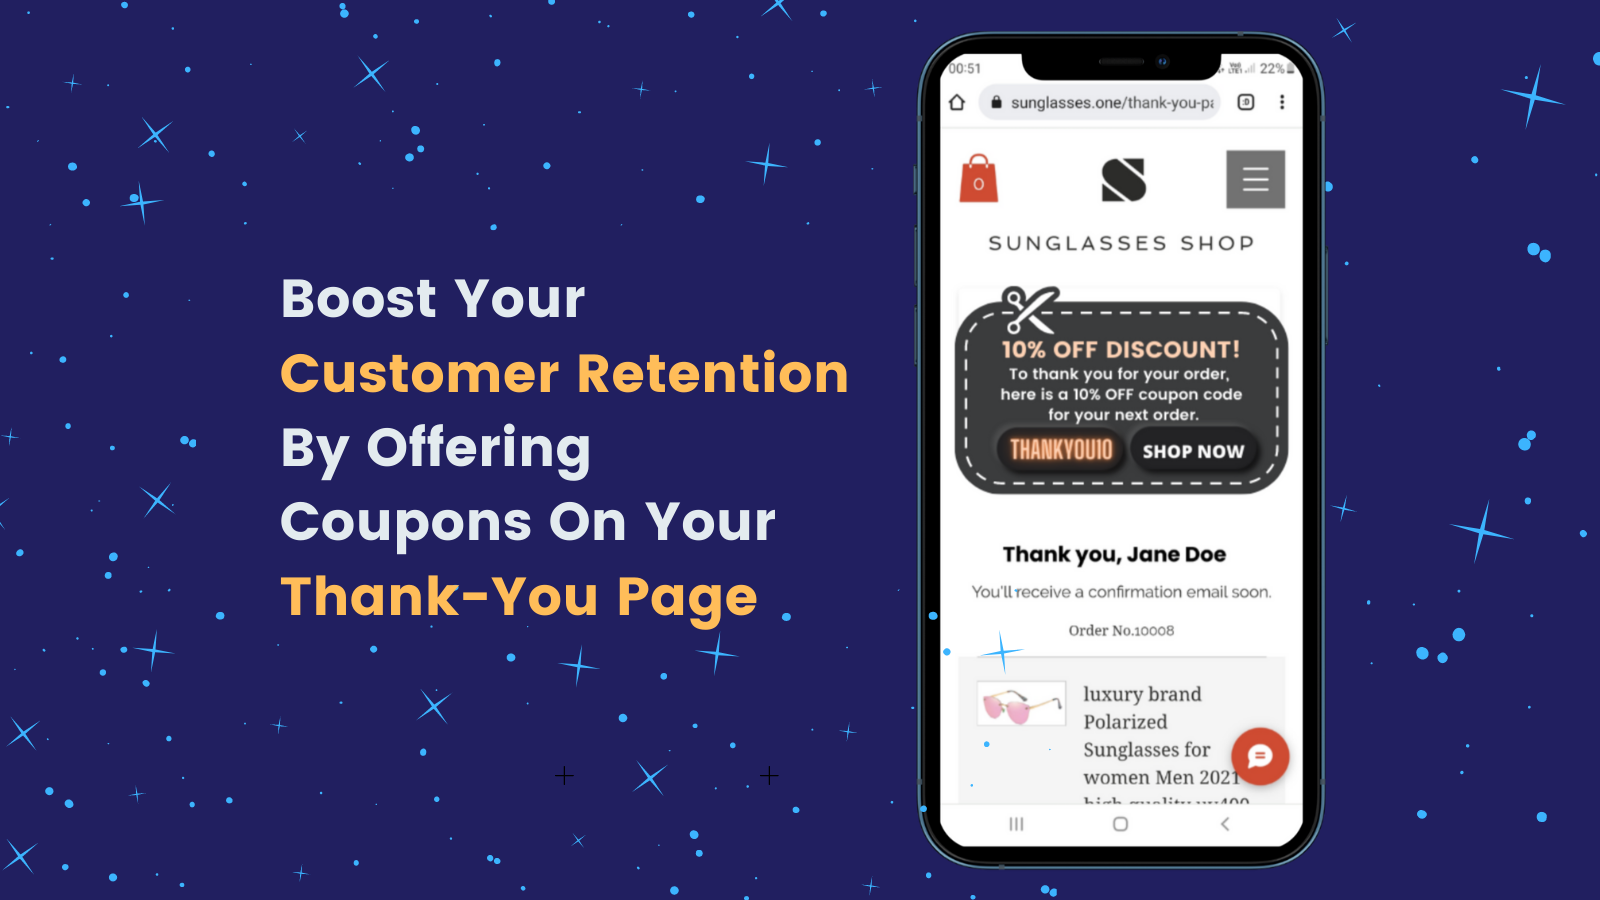 Boost customer retention by offering coupons on your Thank you page.